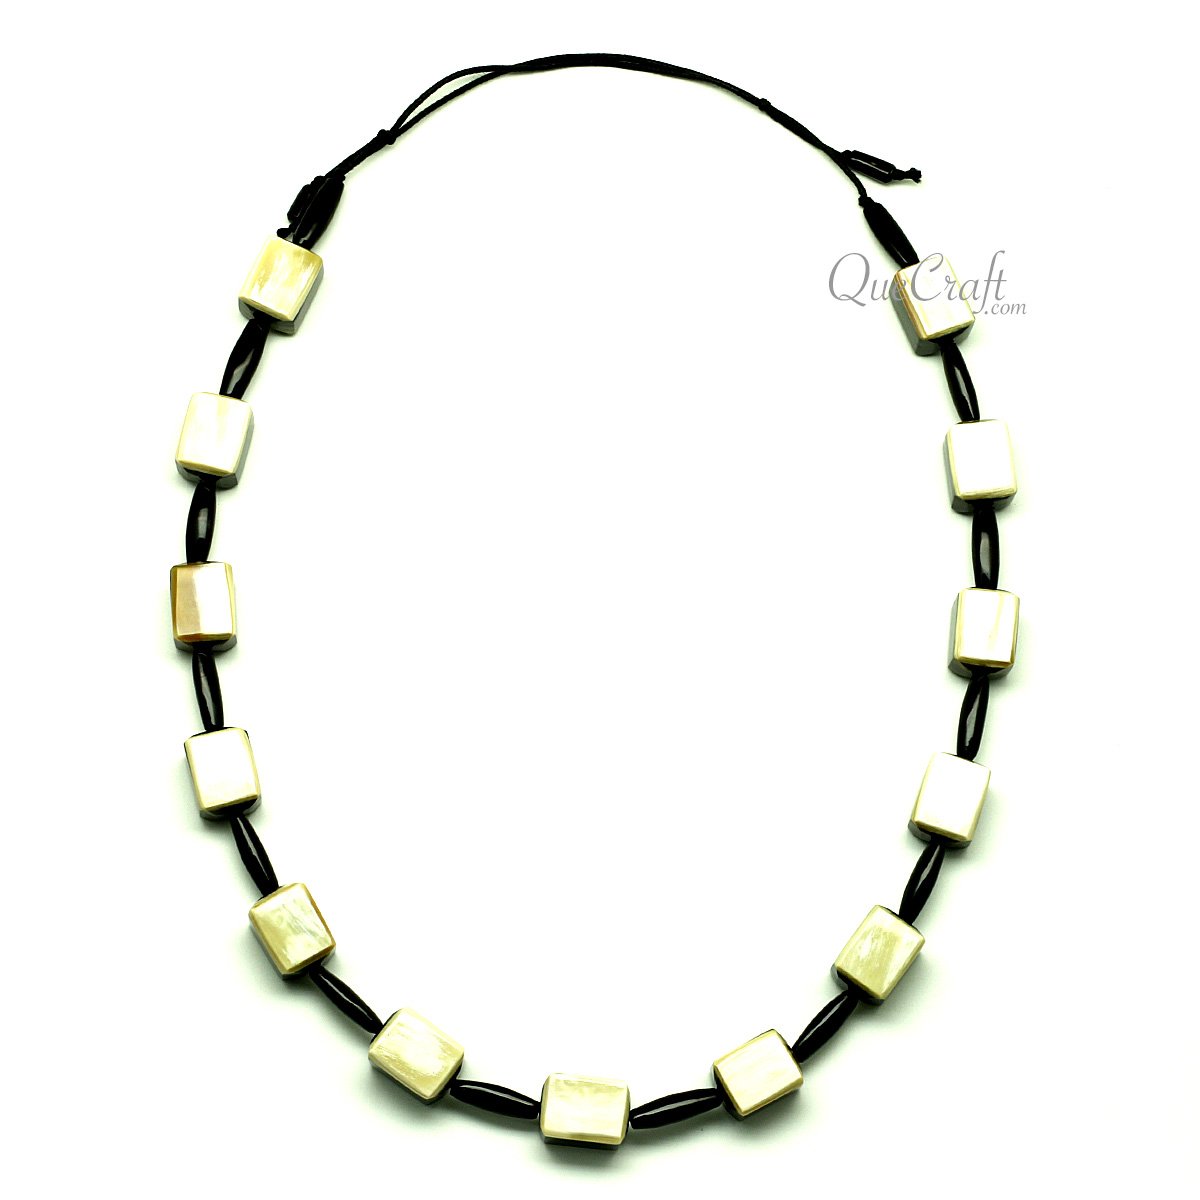 Horn String Necklace #12982 - HORN JEWELRY